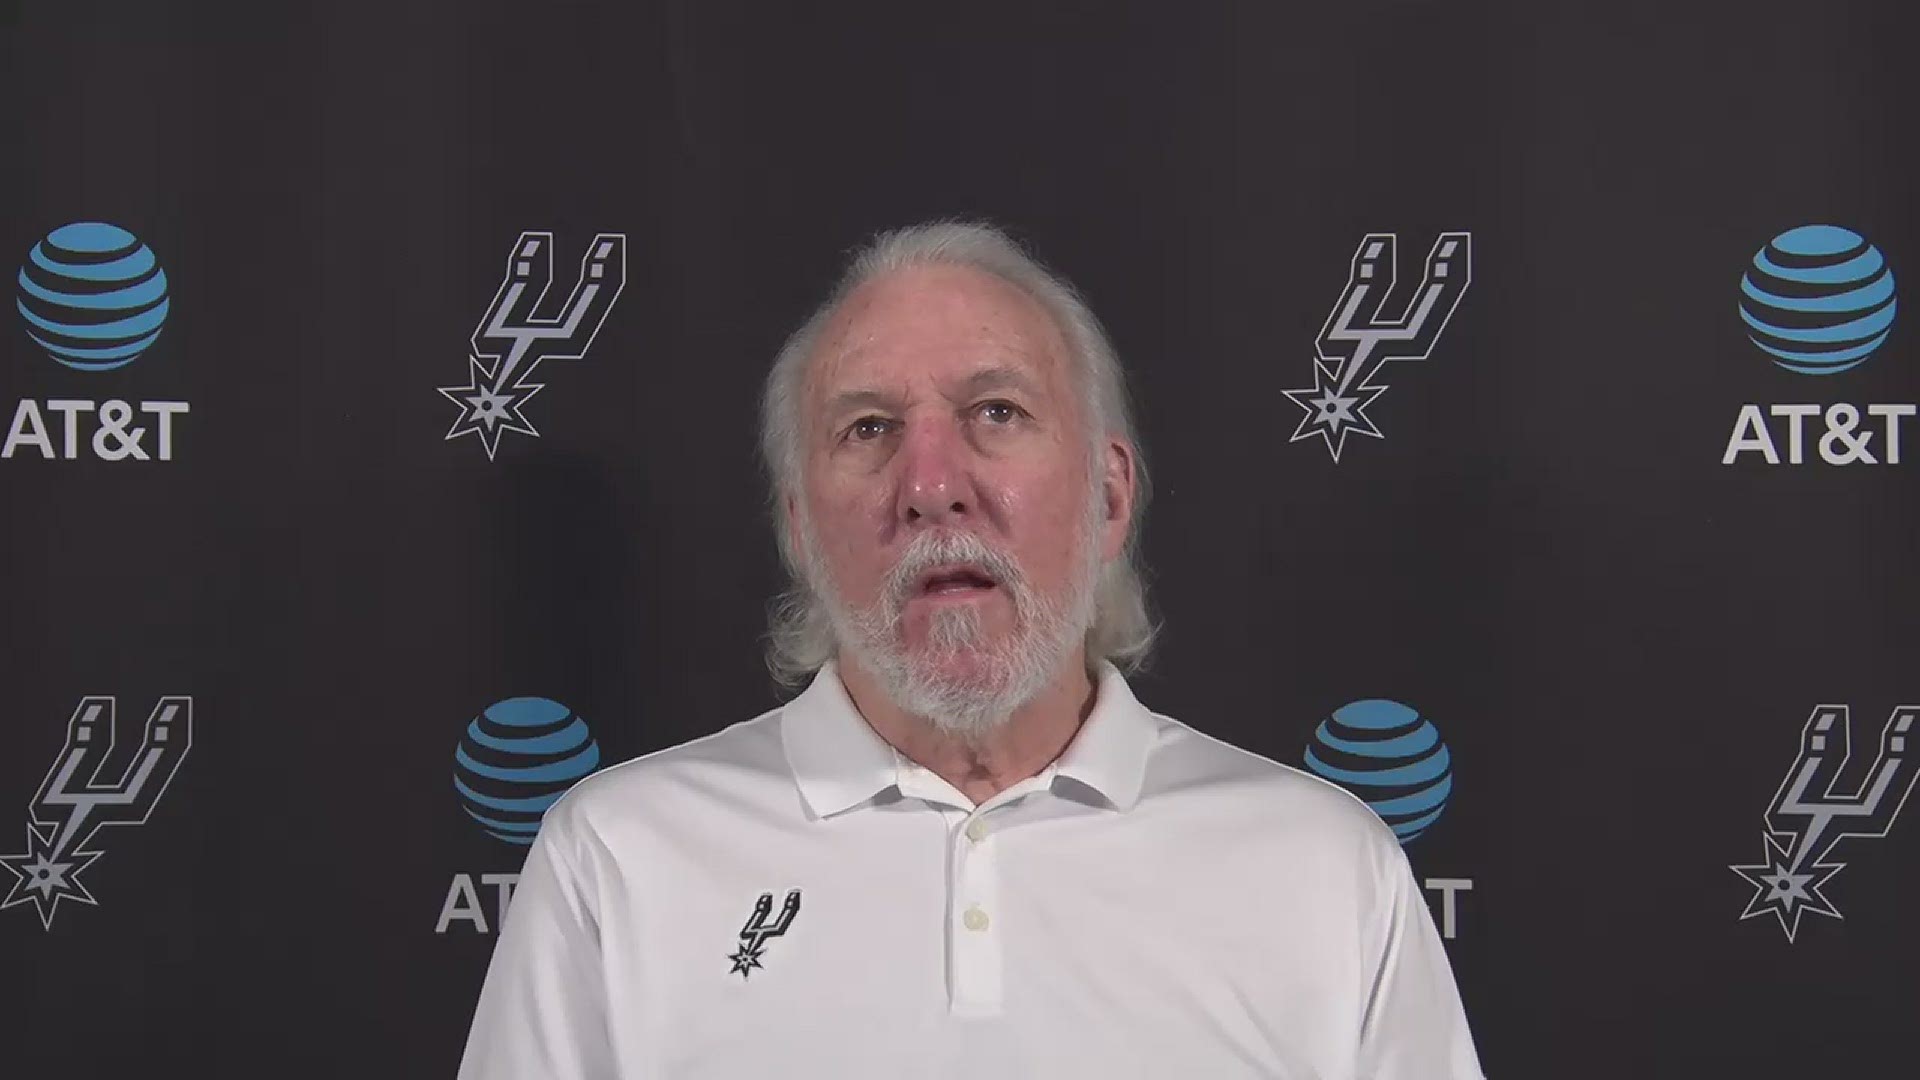 Pop was disappointed DeRozan didn't get a spot, and announced that Luka Samanic and Jakob Poeltl will start for Spurs while LaMarcus Aldridge comes off the bench.